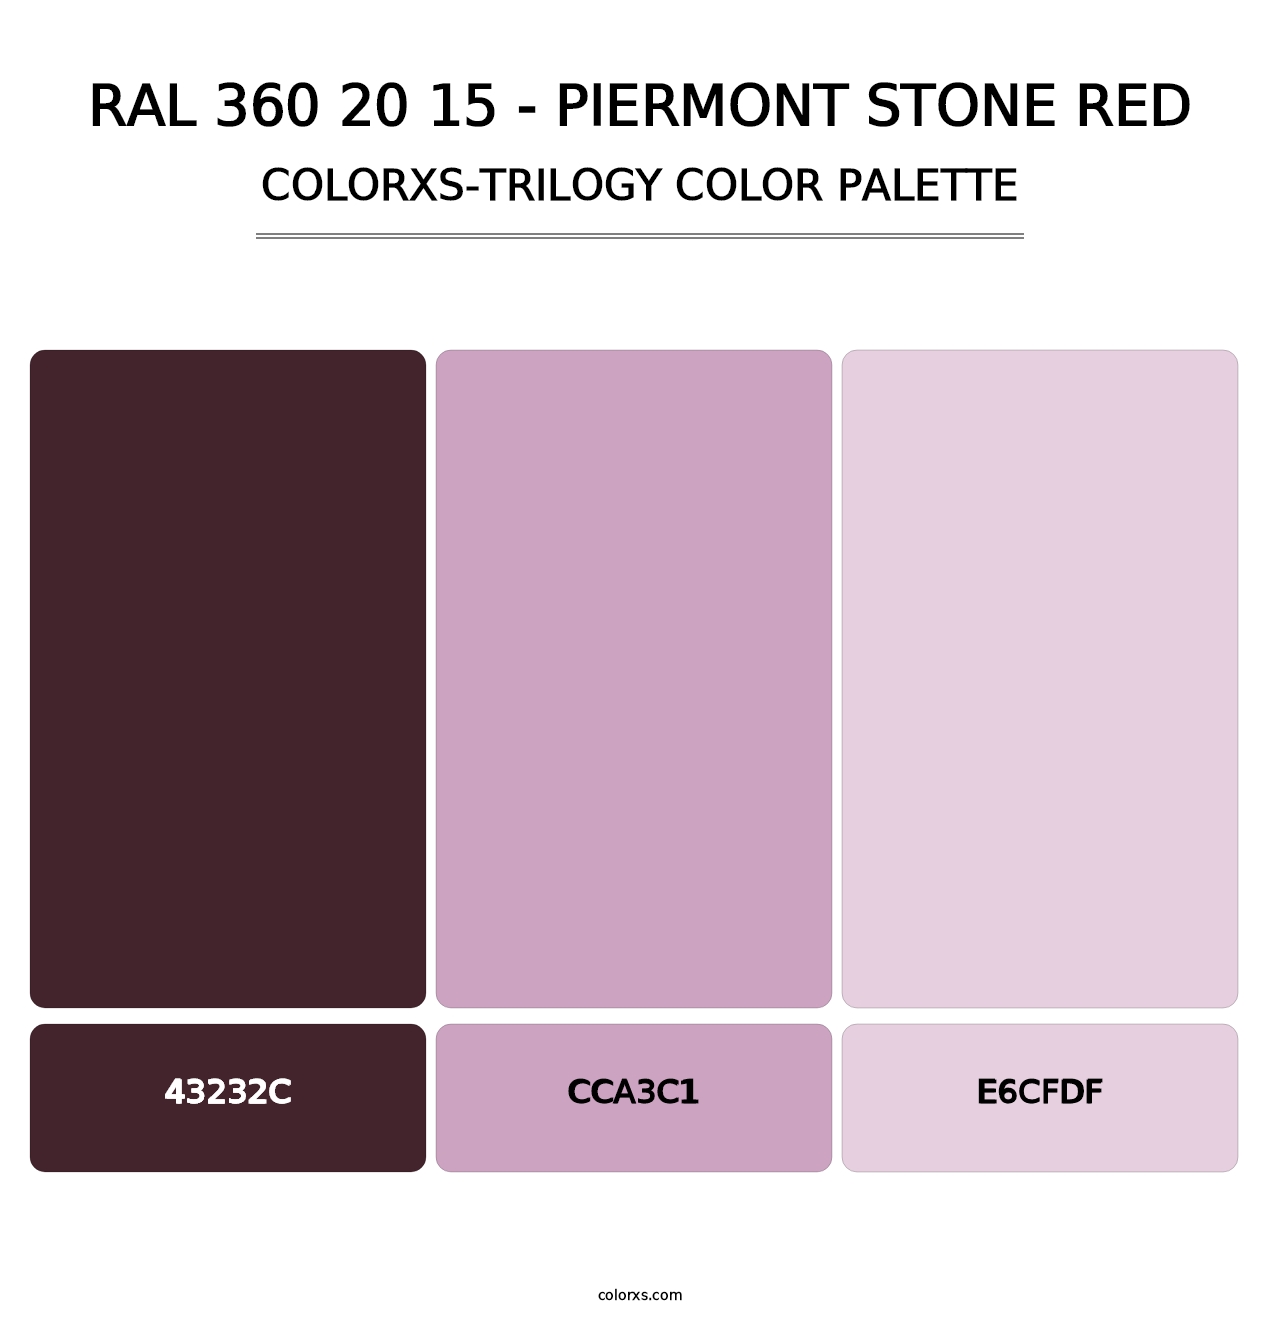 RAL 360 20 15 - Piermont Stone Red - Colorxs Trilogy Palette